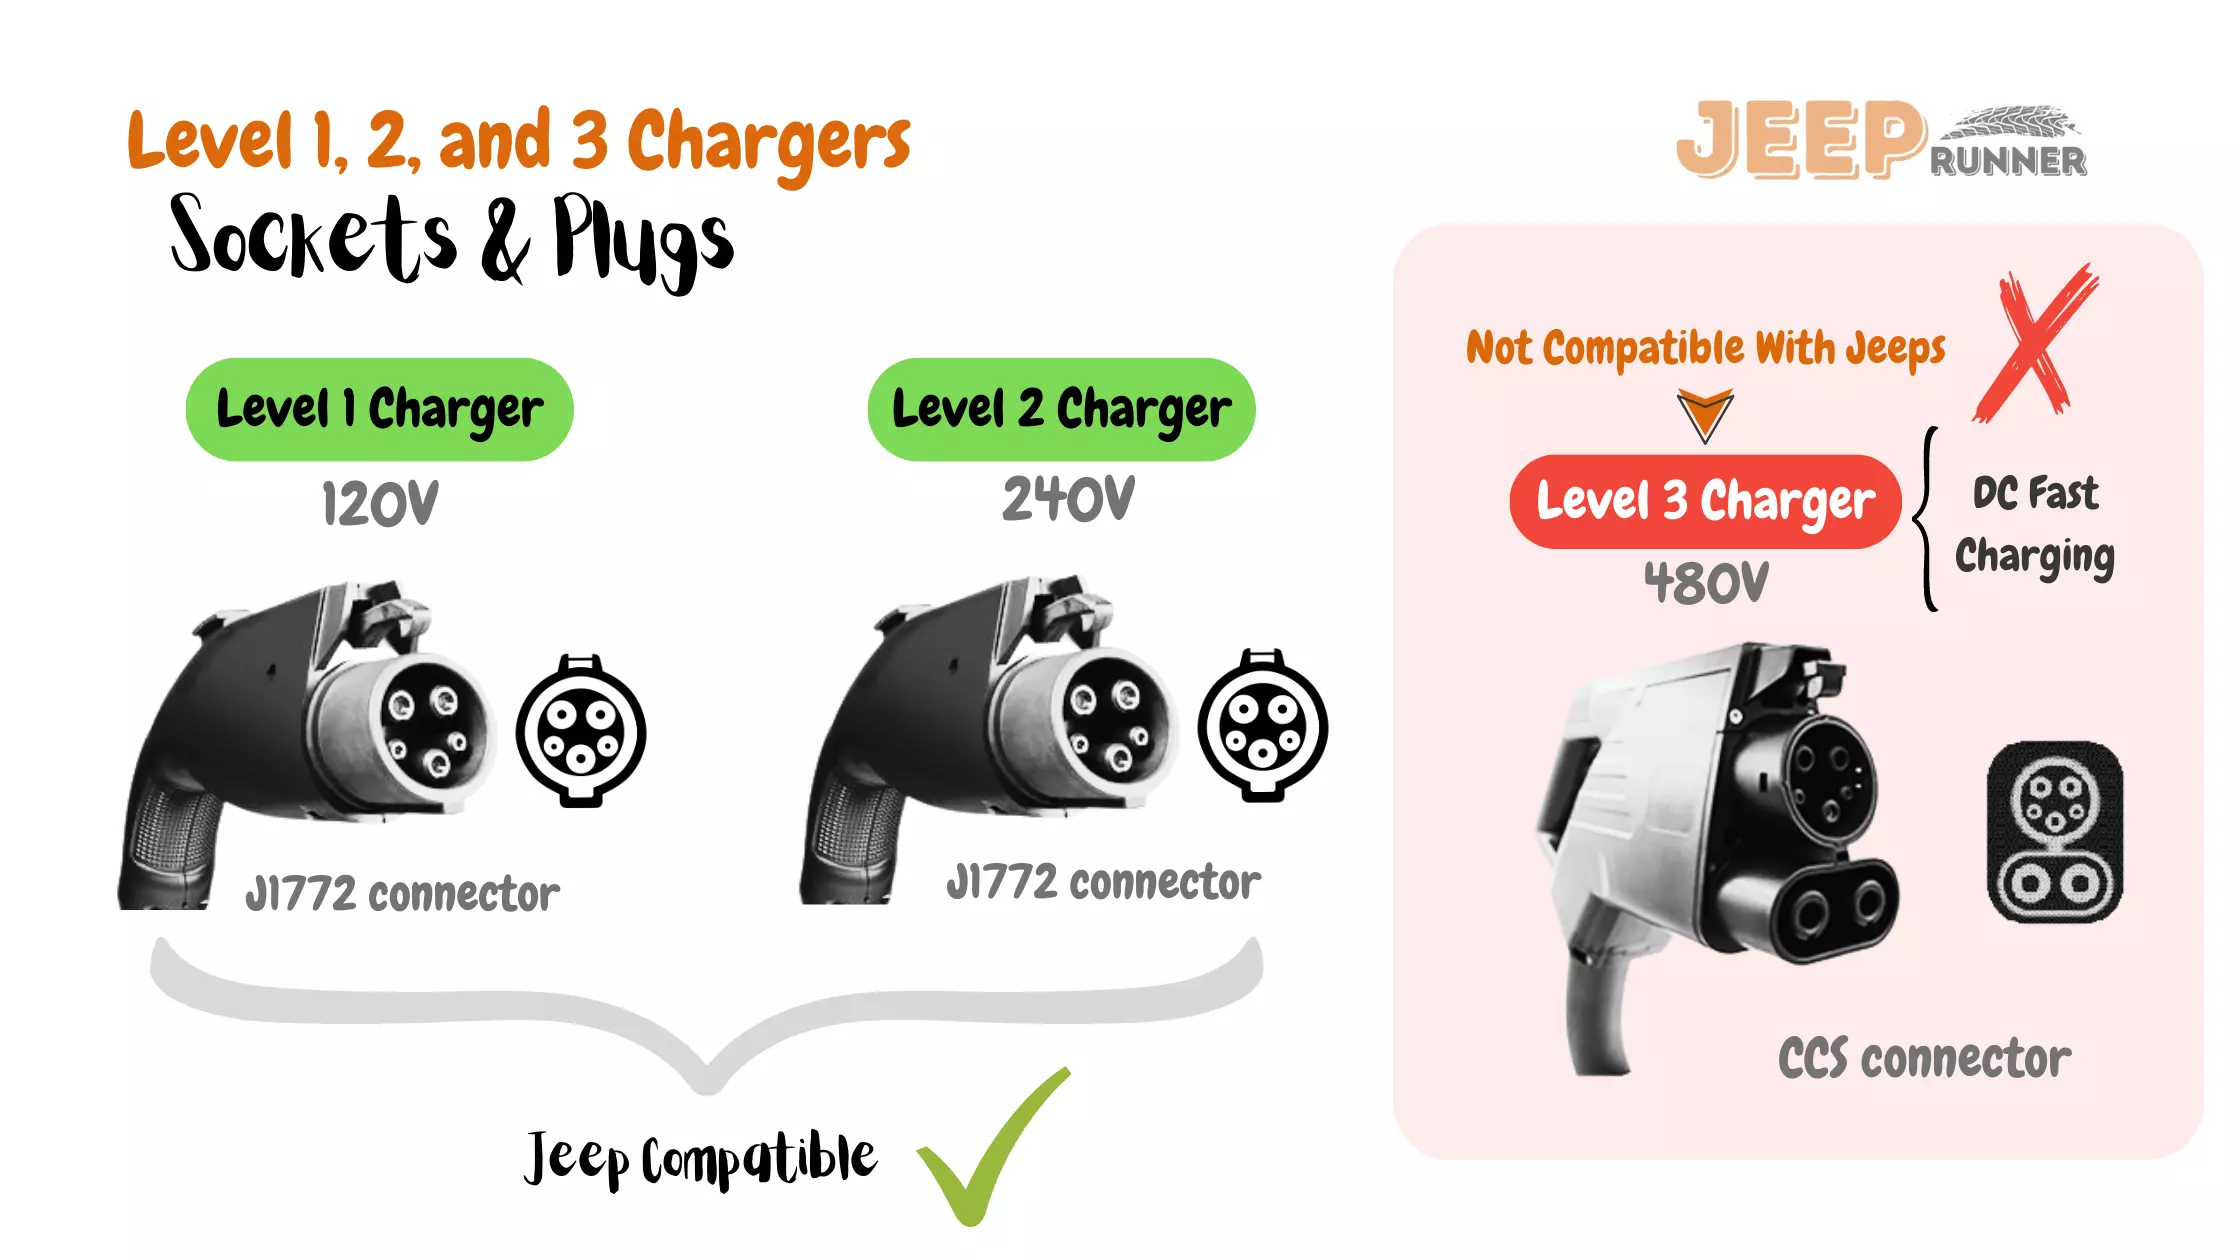 Jeep Charger Types Illustration showcasing different charger levels: Level 1, Level 2, and Level 3 Chargers. Included in the image are sockets and plugs associated with these chargers, Level 1 and Level 2 chargers are marked compatible with Jeeps, and Level 2 chargers are marked not compatible with Jeeps. Voltage specifications of 240V, 120V, and 480V is indicated below each respective charger, along with DC Fast Charging on the Level 3 charger are indicated as texts. Connectors such as J1772 and CCS connectors are depicted as images and text.